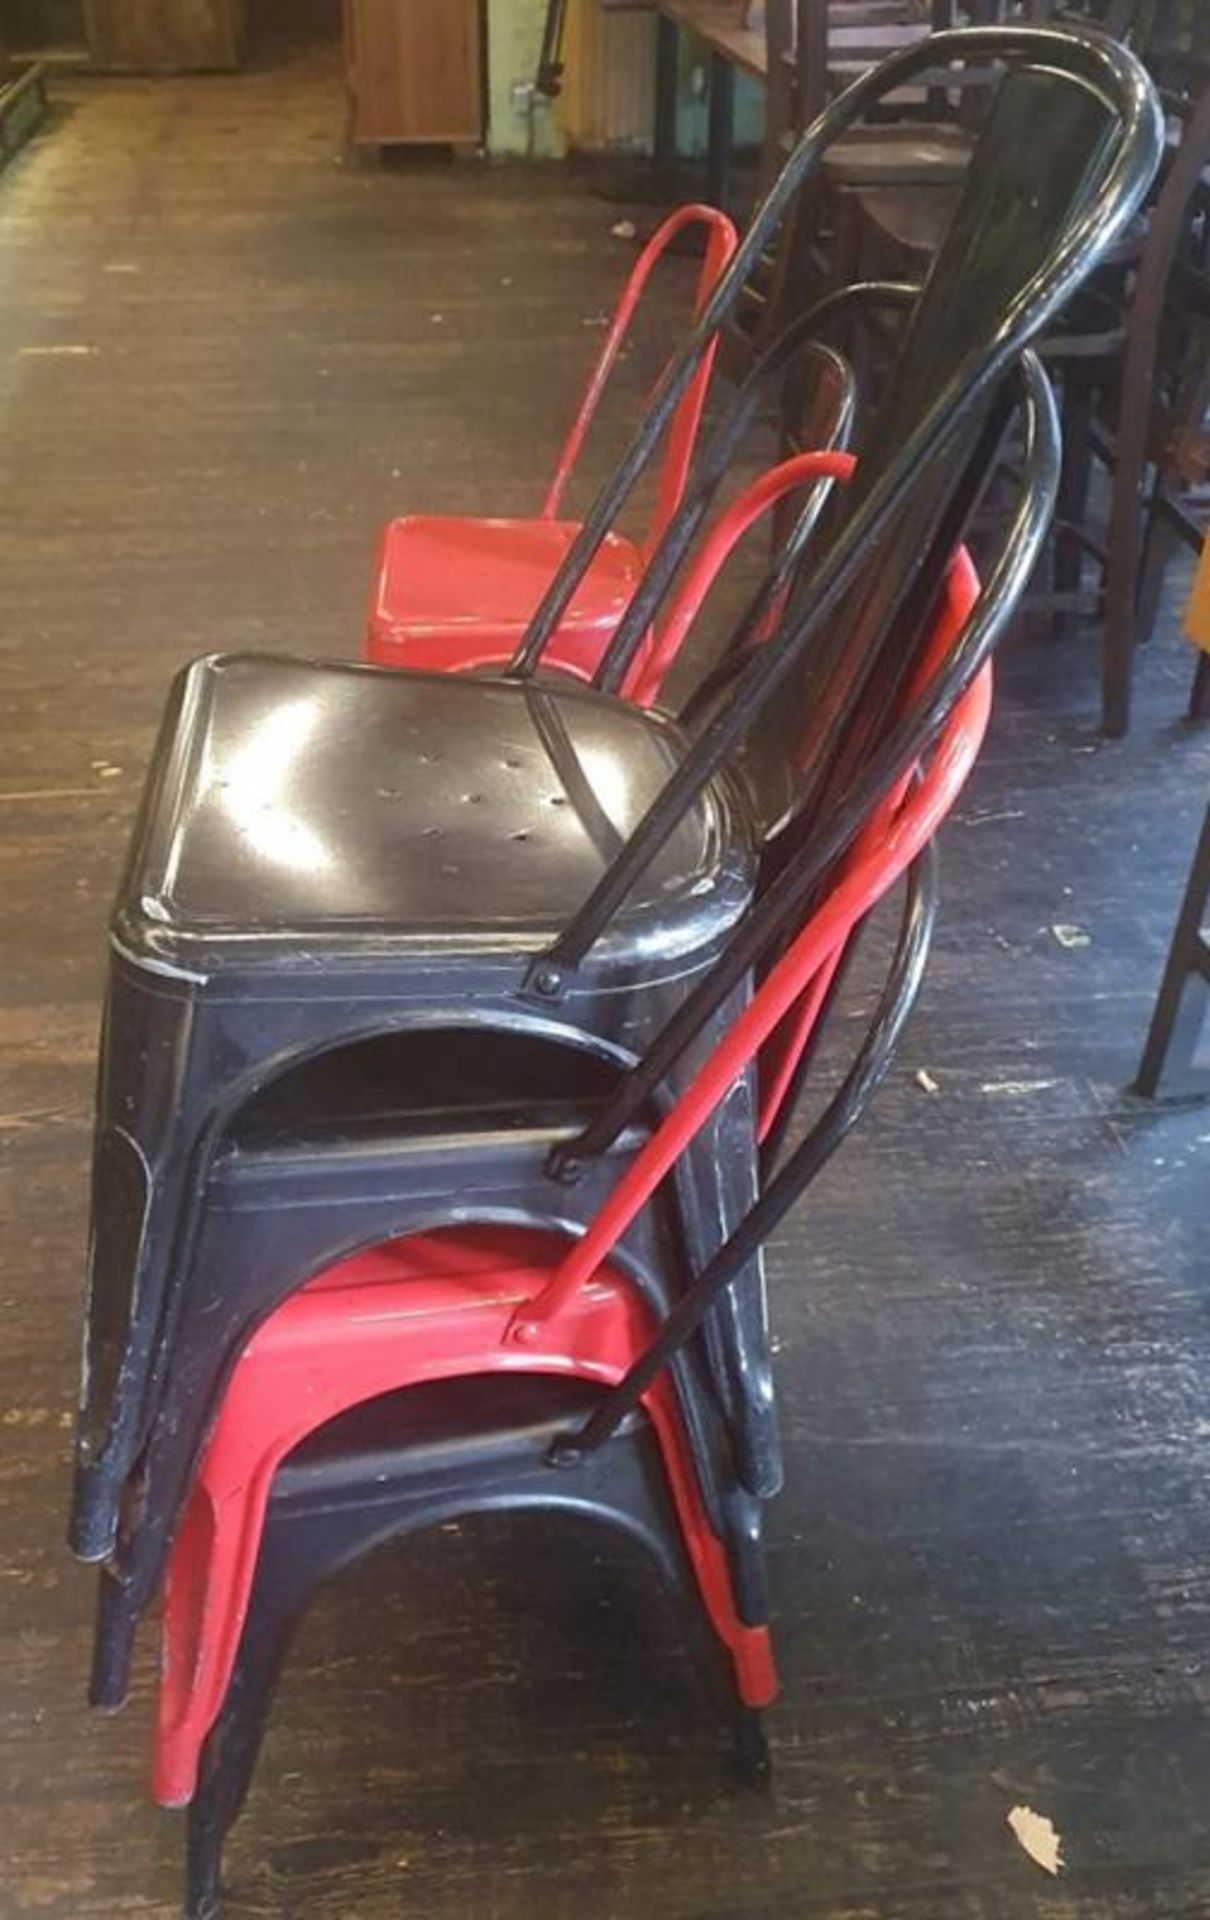 6 x Assorted Rustic Metal Bistro Chairs - Includes 2 x In Red, And 4 x In Black - Recently Taken Fro - Image 5 of 5